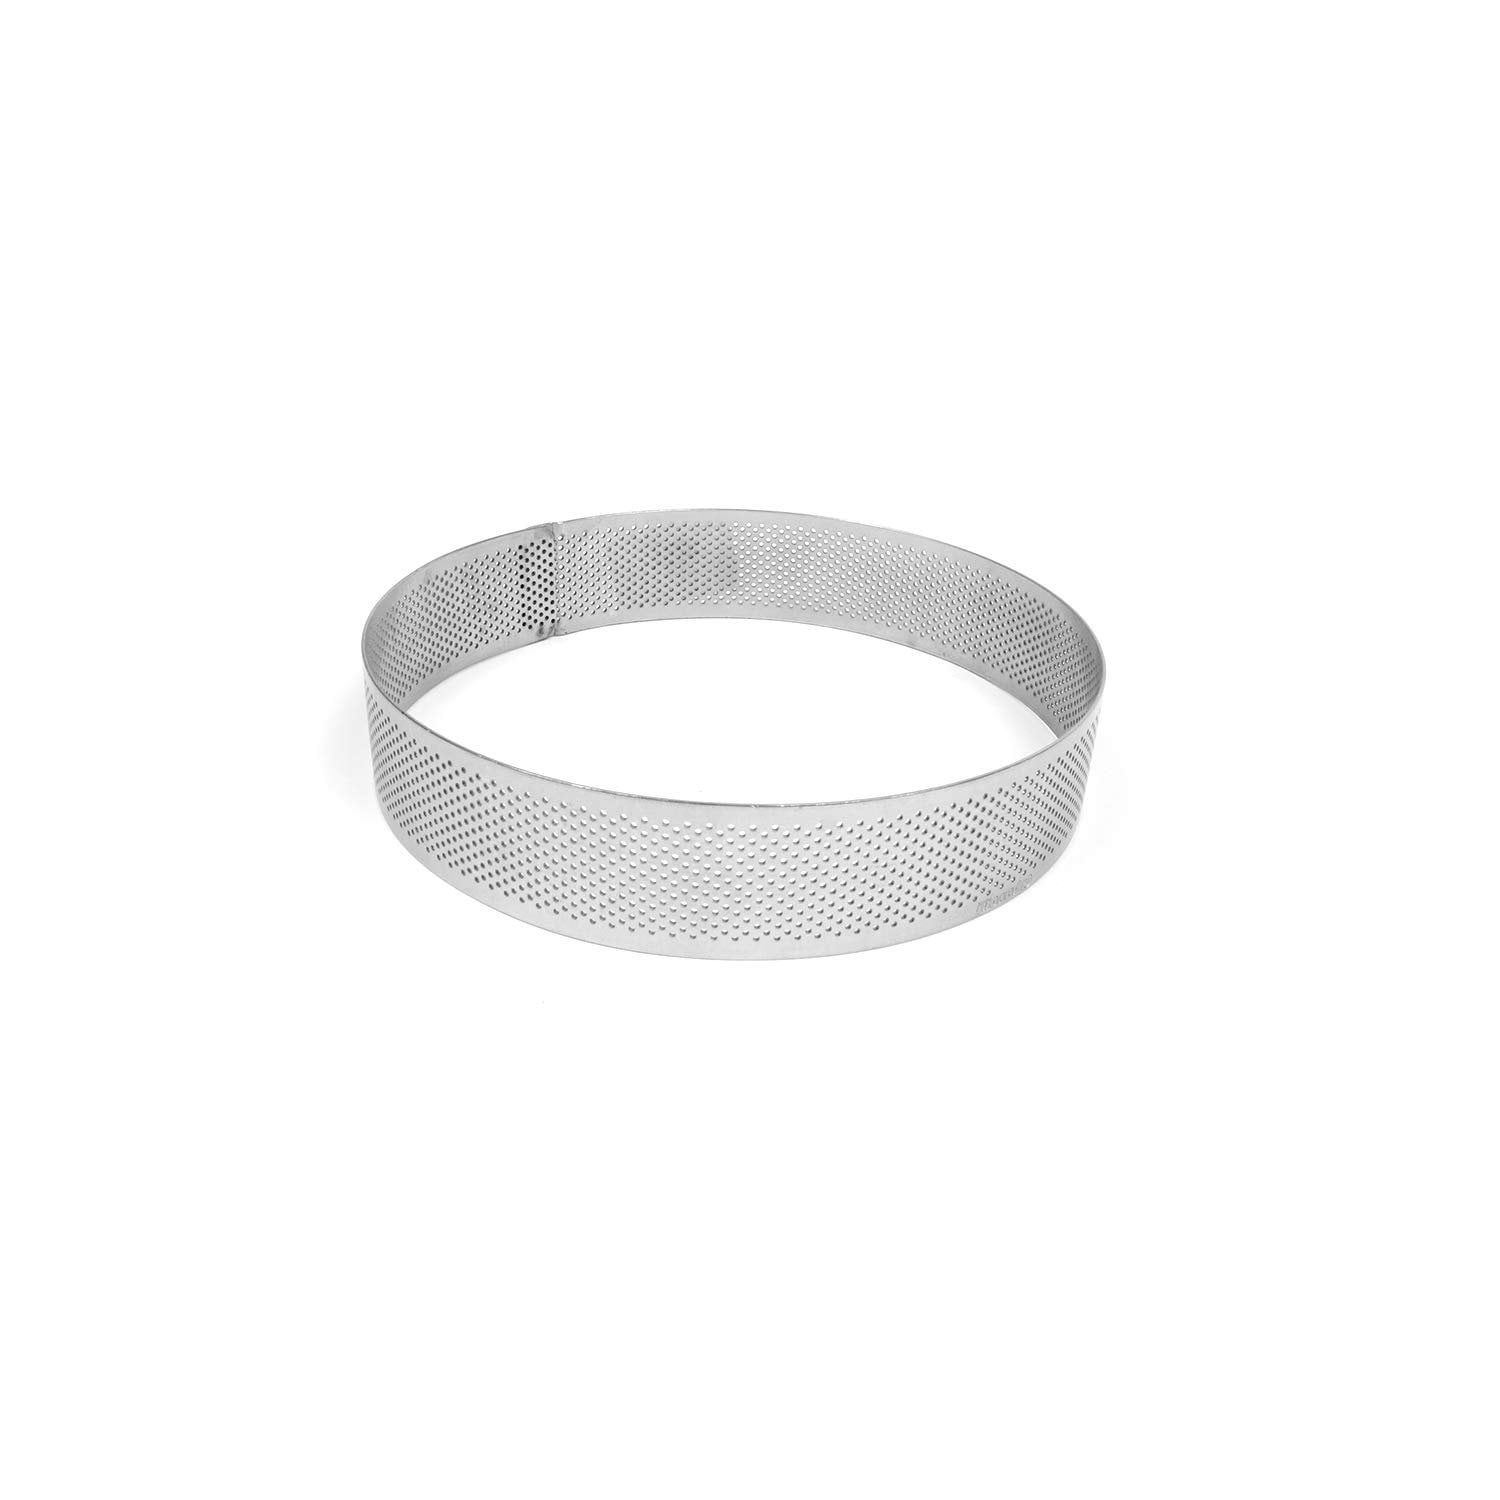 Pavoni Progetto Crostate Perforated Stainless Steel Round Tart Ring 3.5 ...